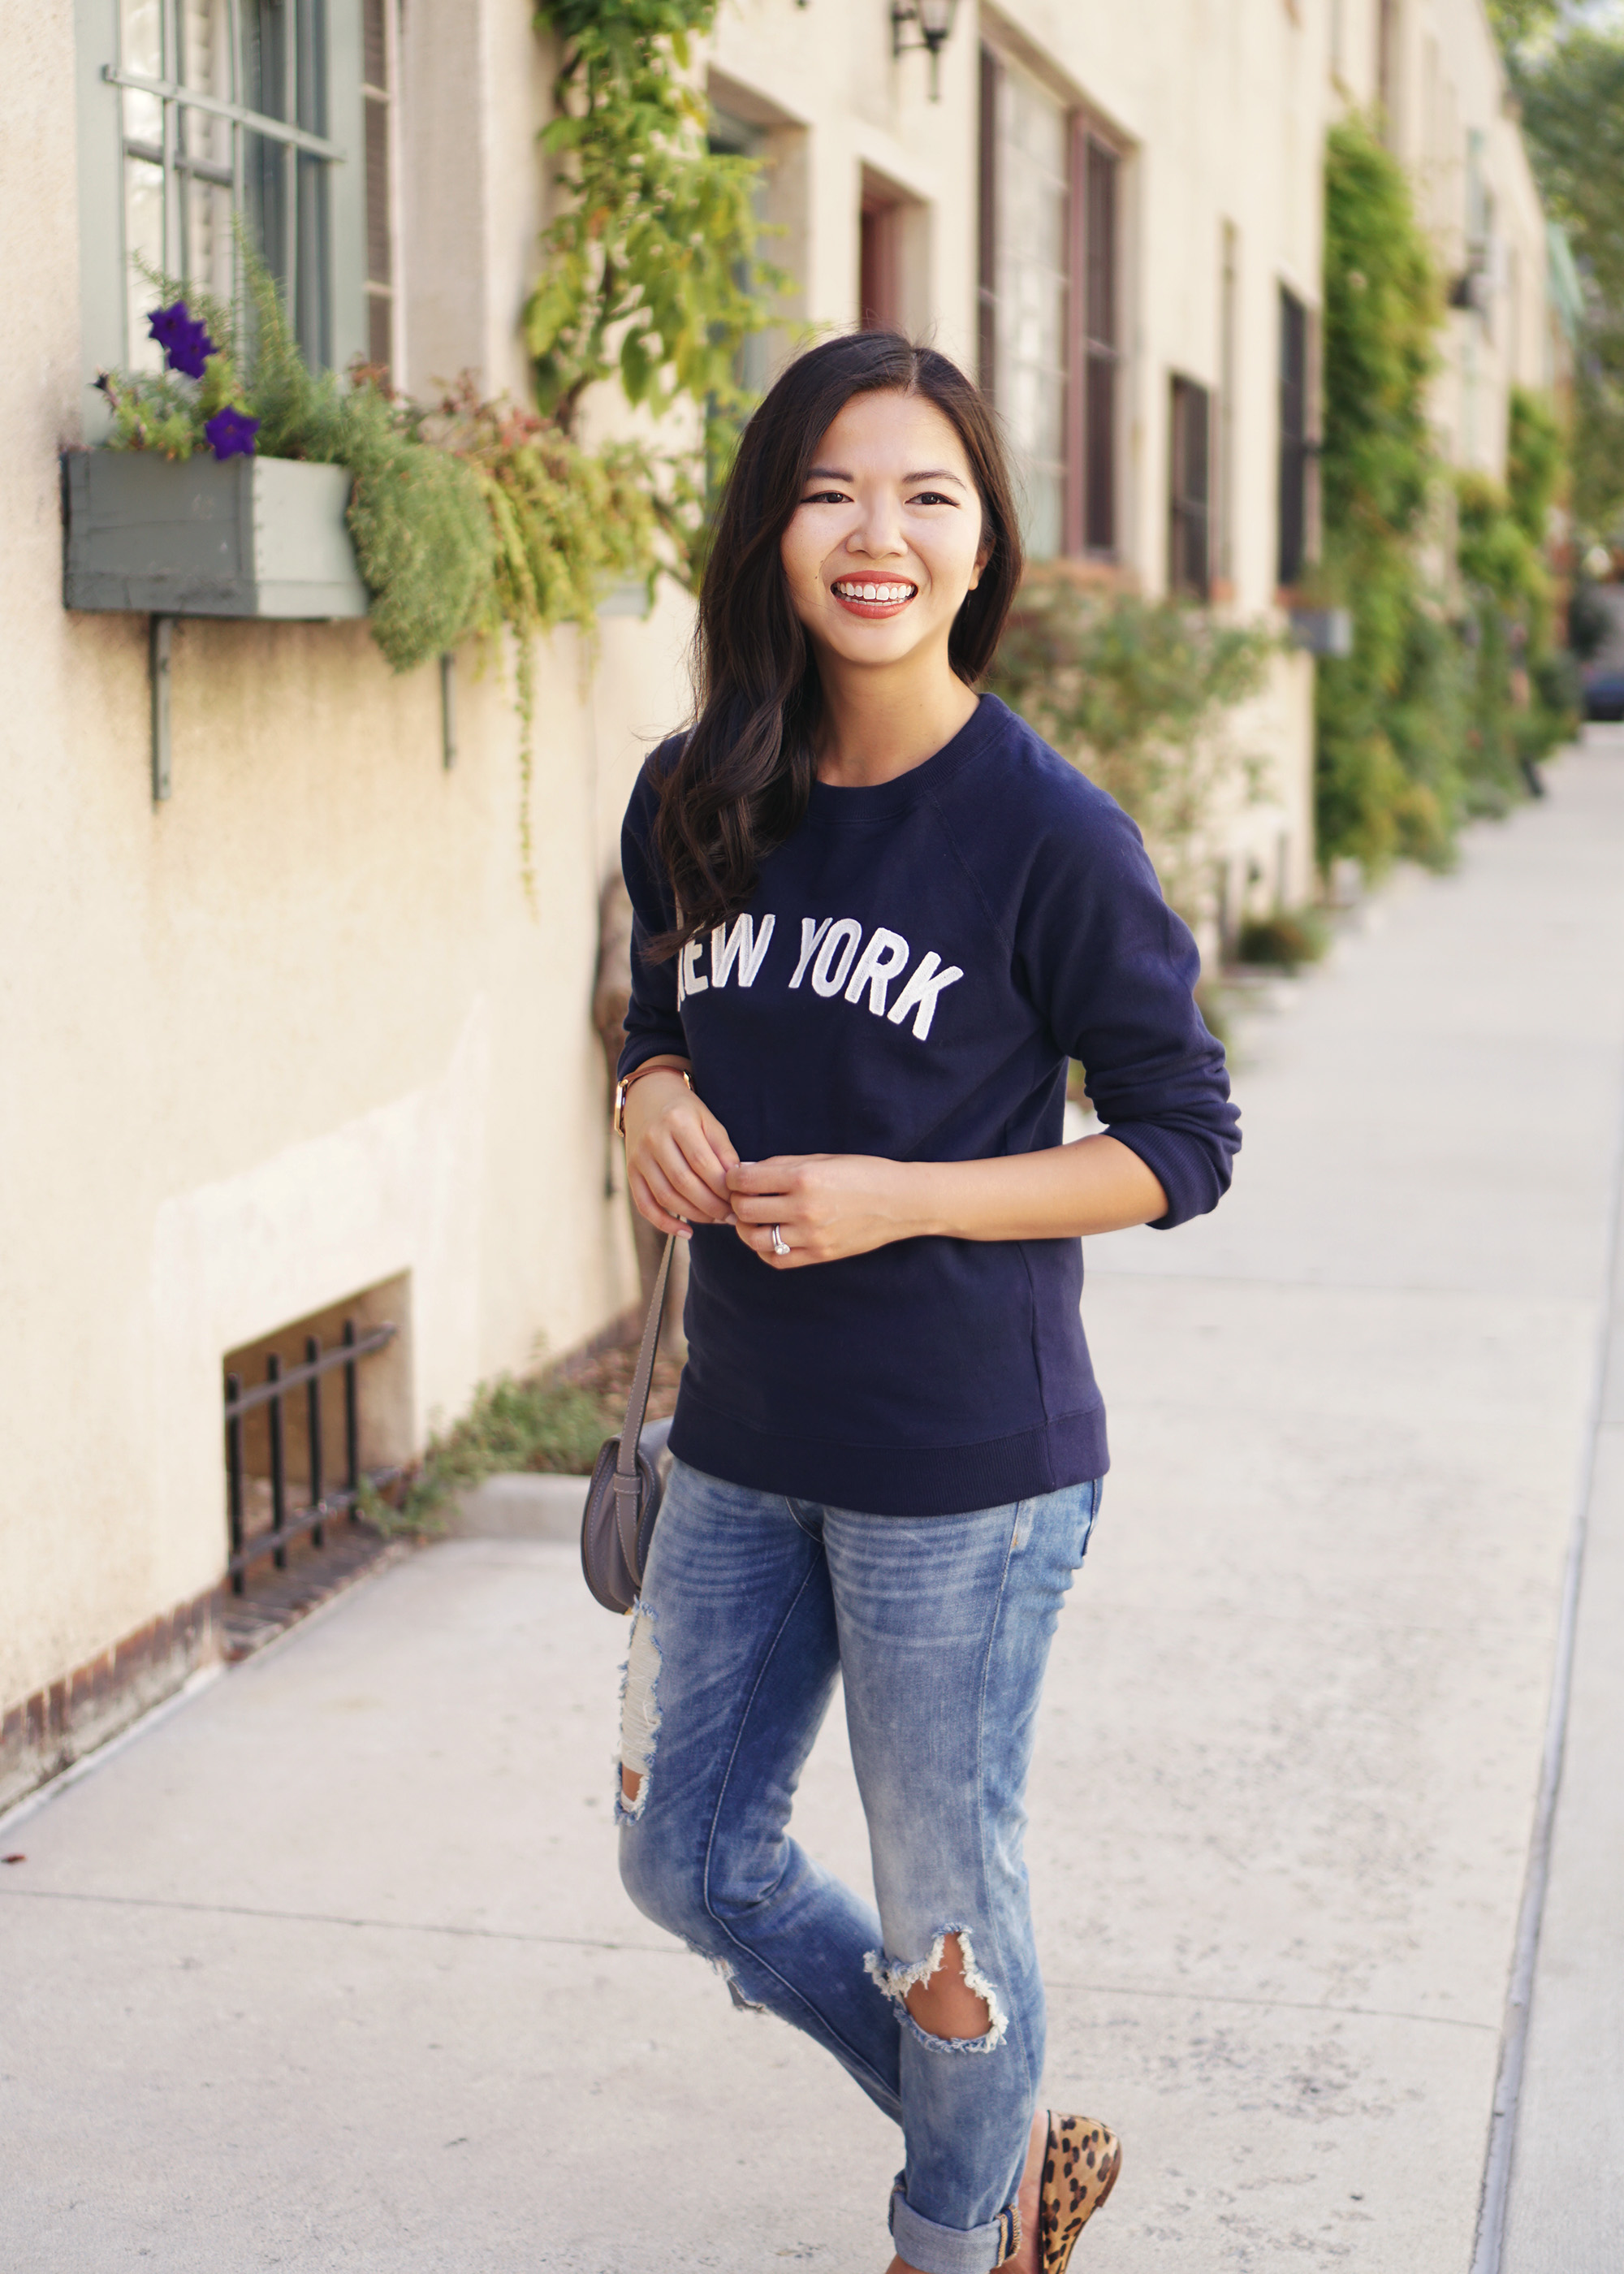 Fall Style / New York Graphic Sweatshirt & Ripped Jeans